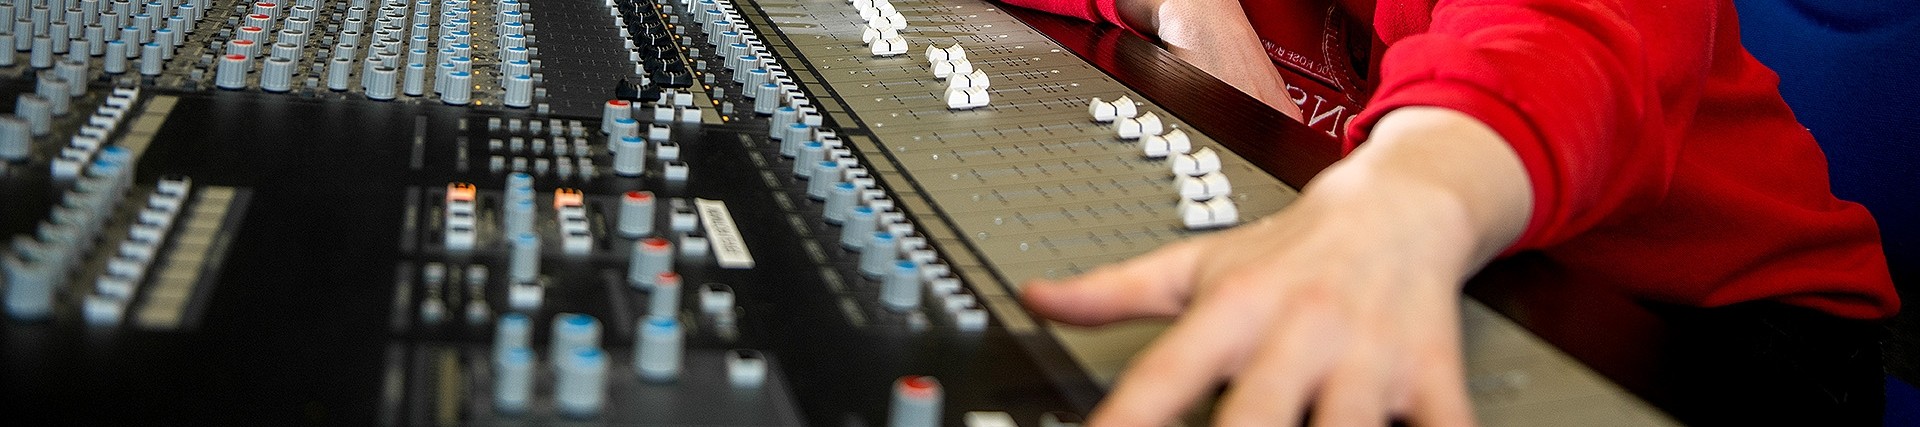 An arm stretches out across a mixing board with numerous sliders and knobs.